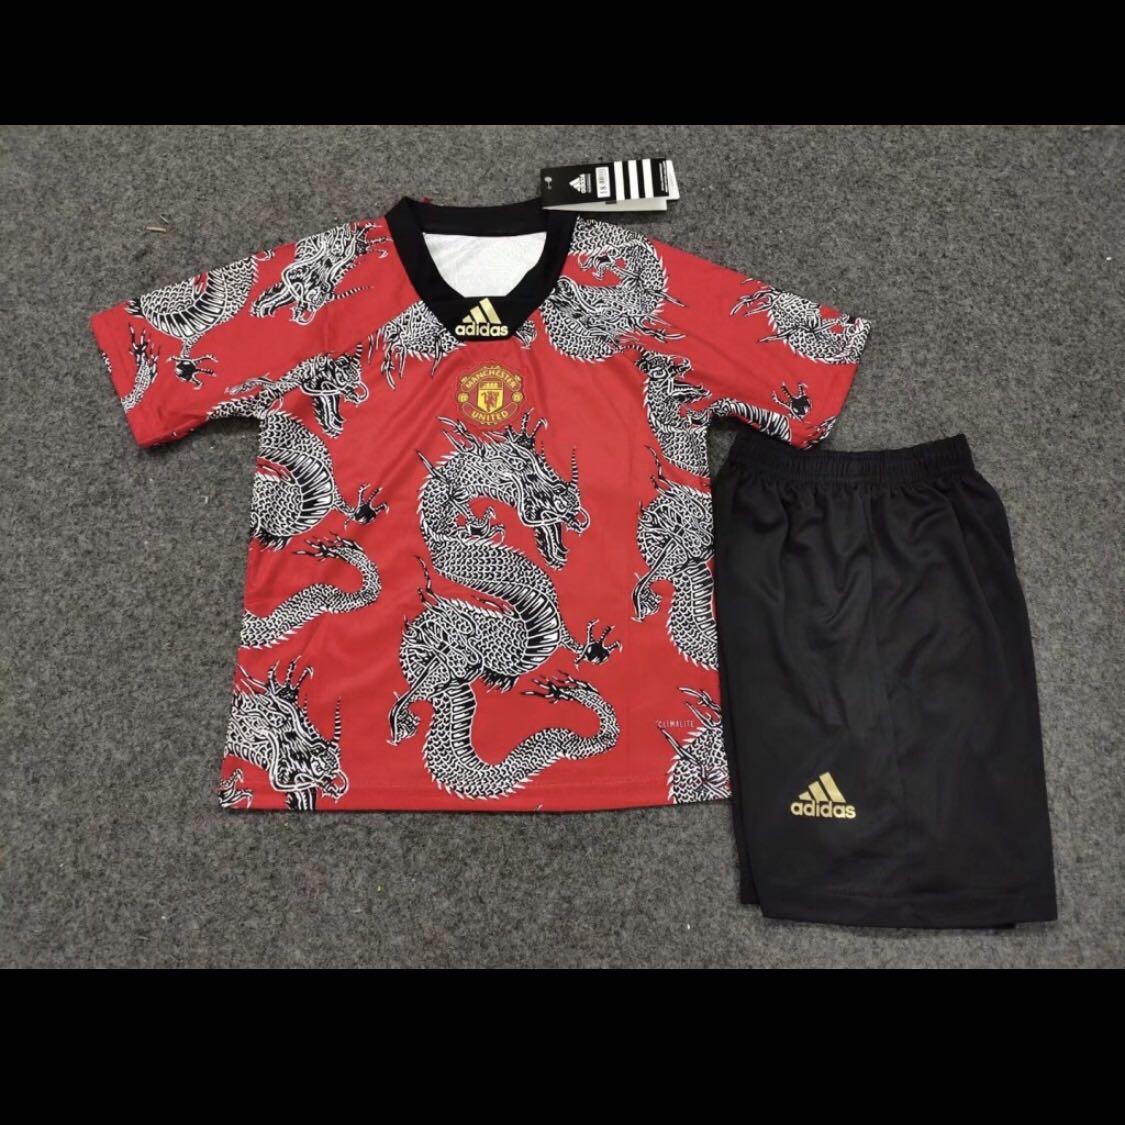 manchester united chinese jersey